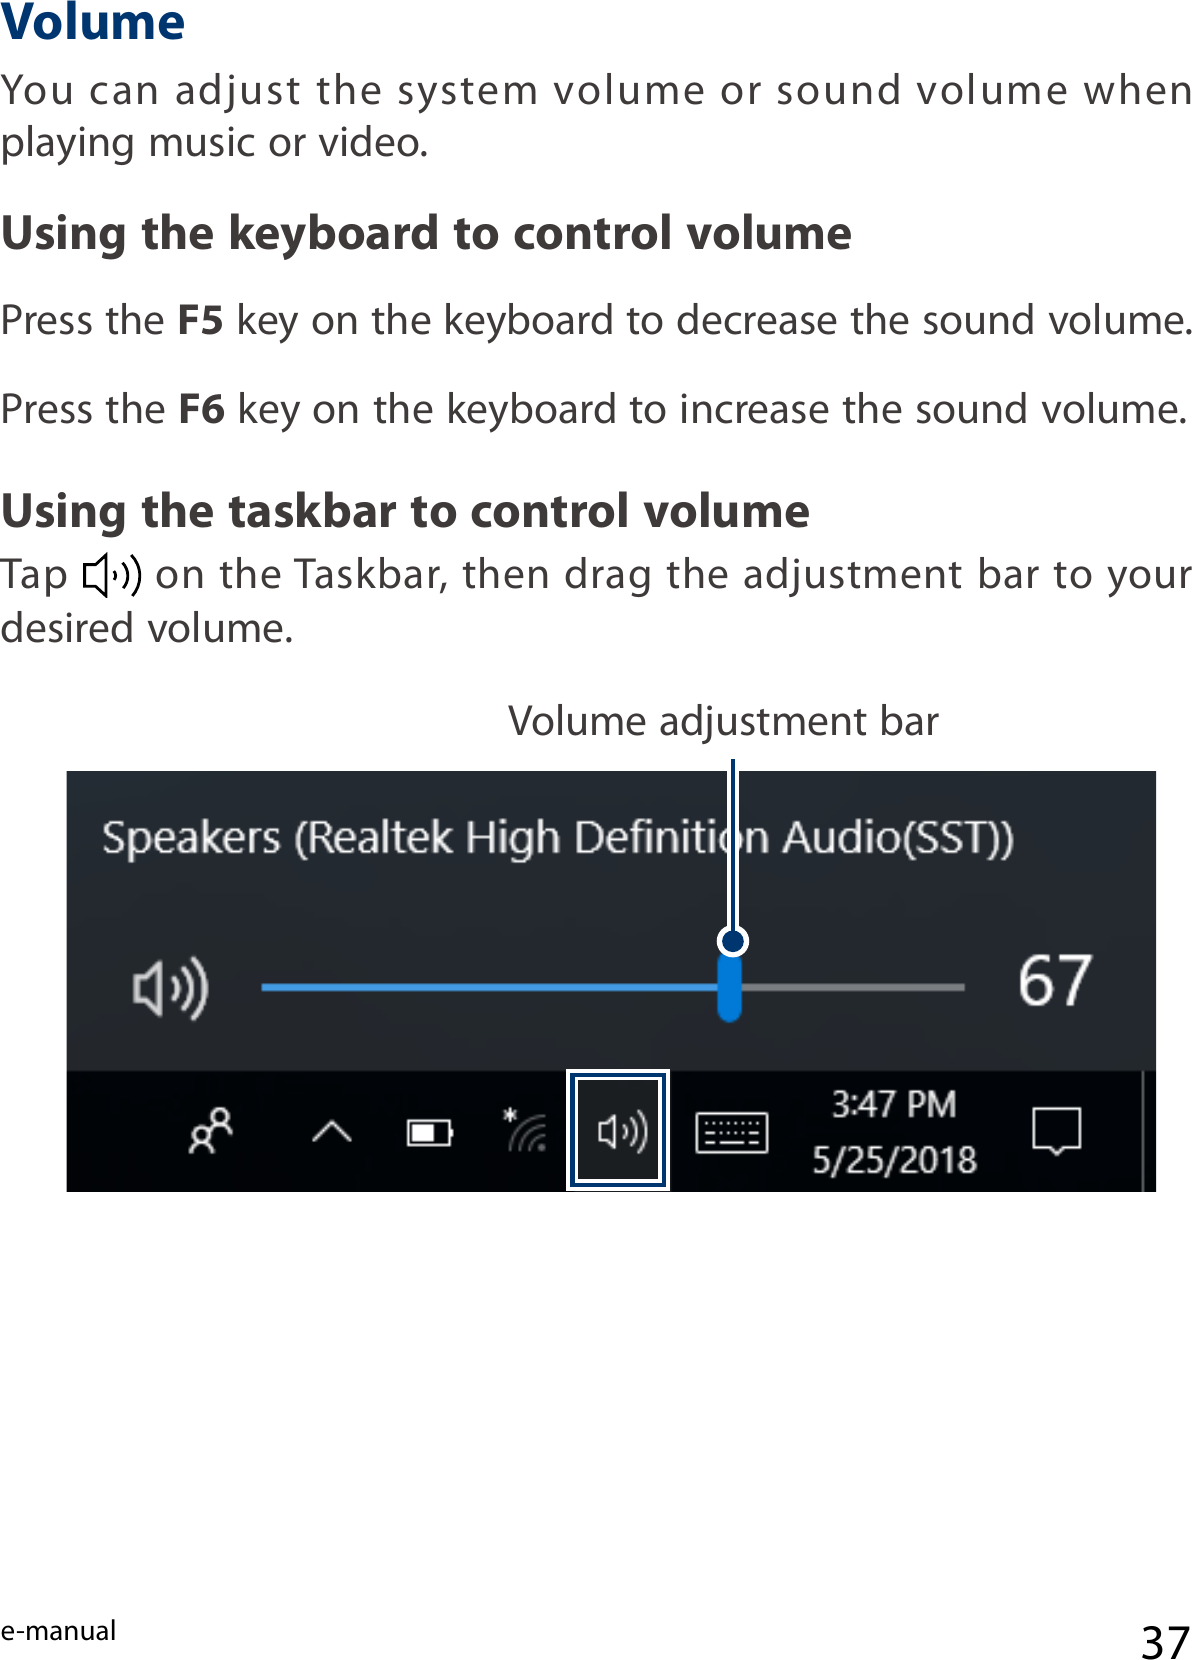 e-manual 37You  can adjust  the system volume  or  sound volume when playing music or video.Press the F5 key on the keyboard to decrease the sound volume.Press the F6 key on the keyboard to increase the sound volume.Tap   on the Taskbar, then drag the adjustment bar to your desired volume.Using the keyboard to control volumeVolumeUsing the taskbar to control volumeVolume adjustment bar